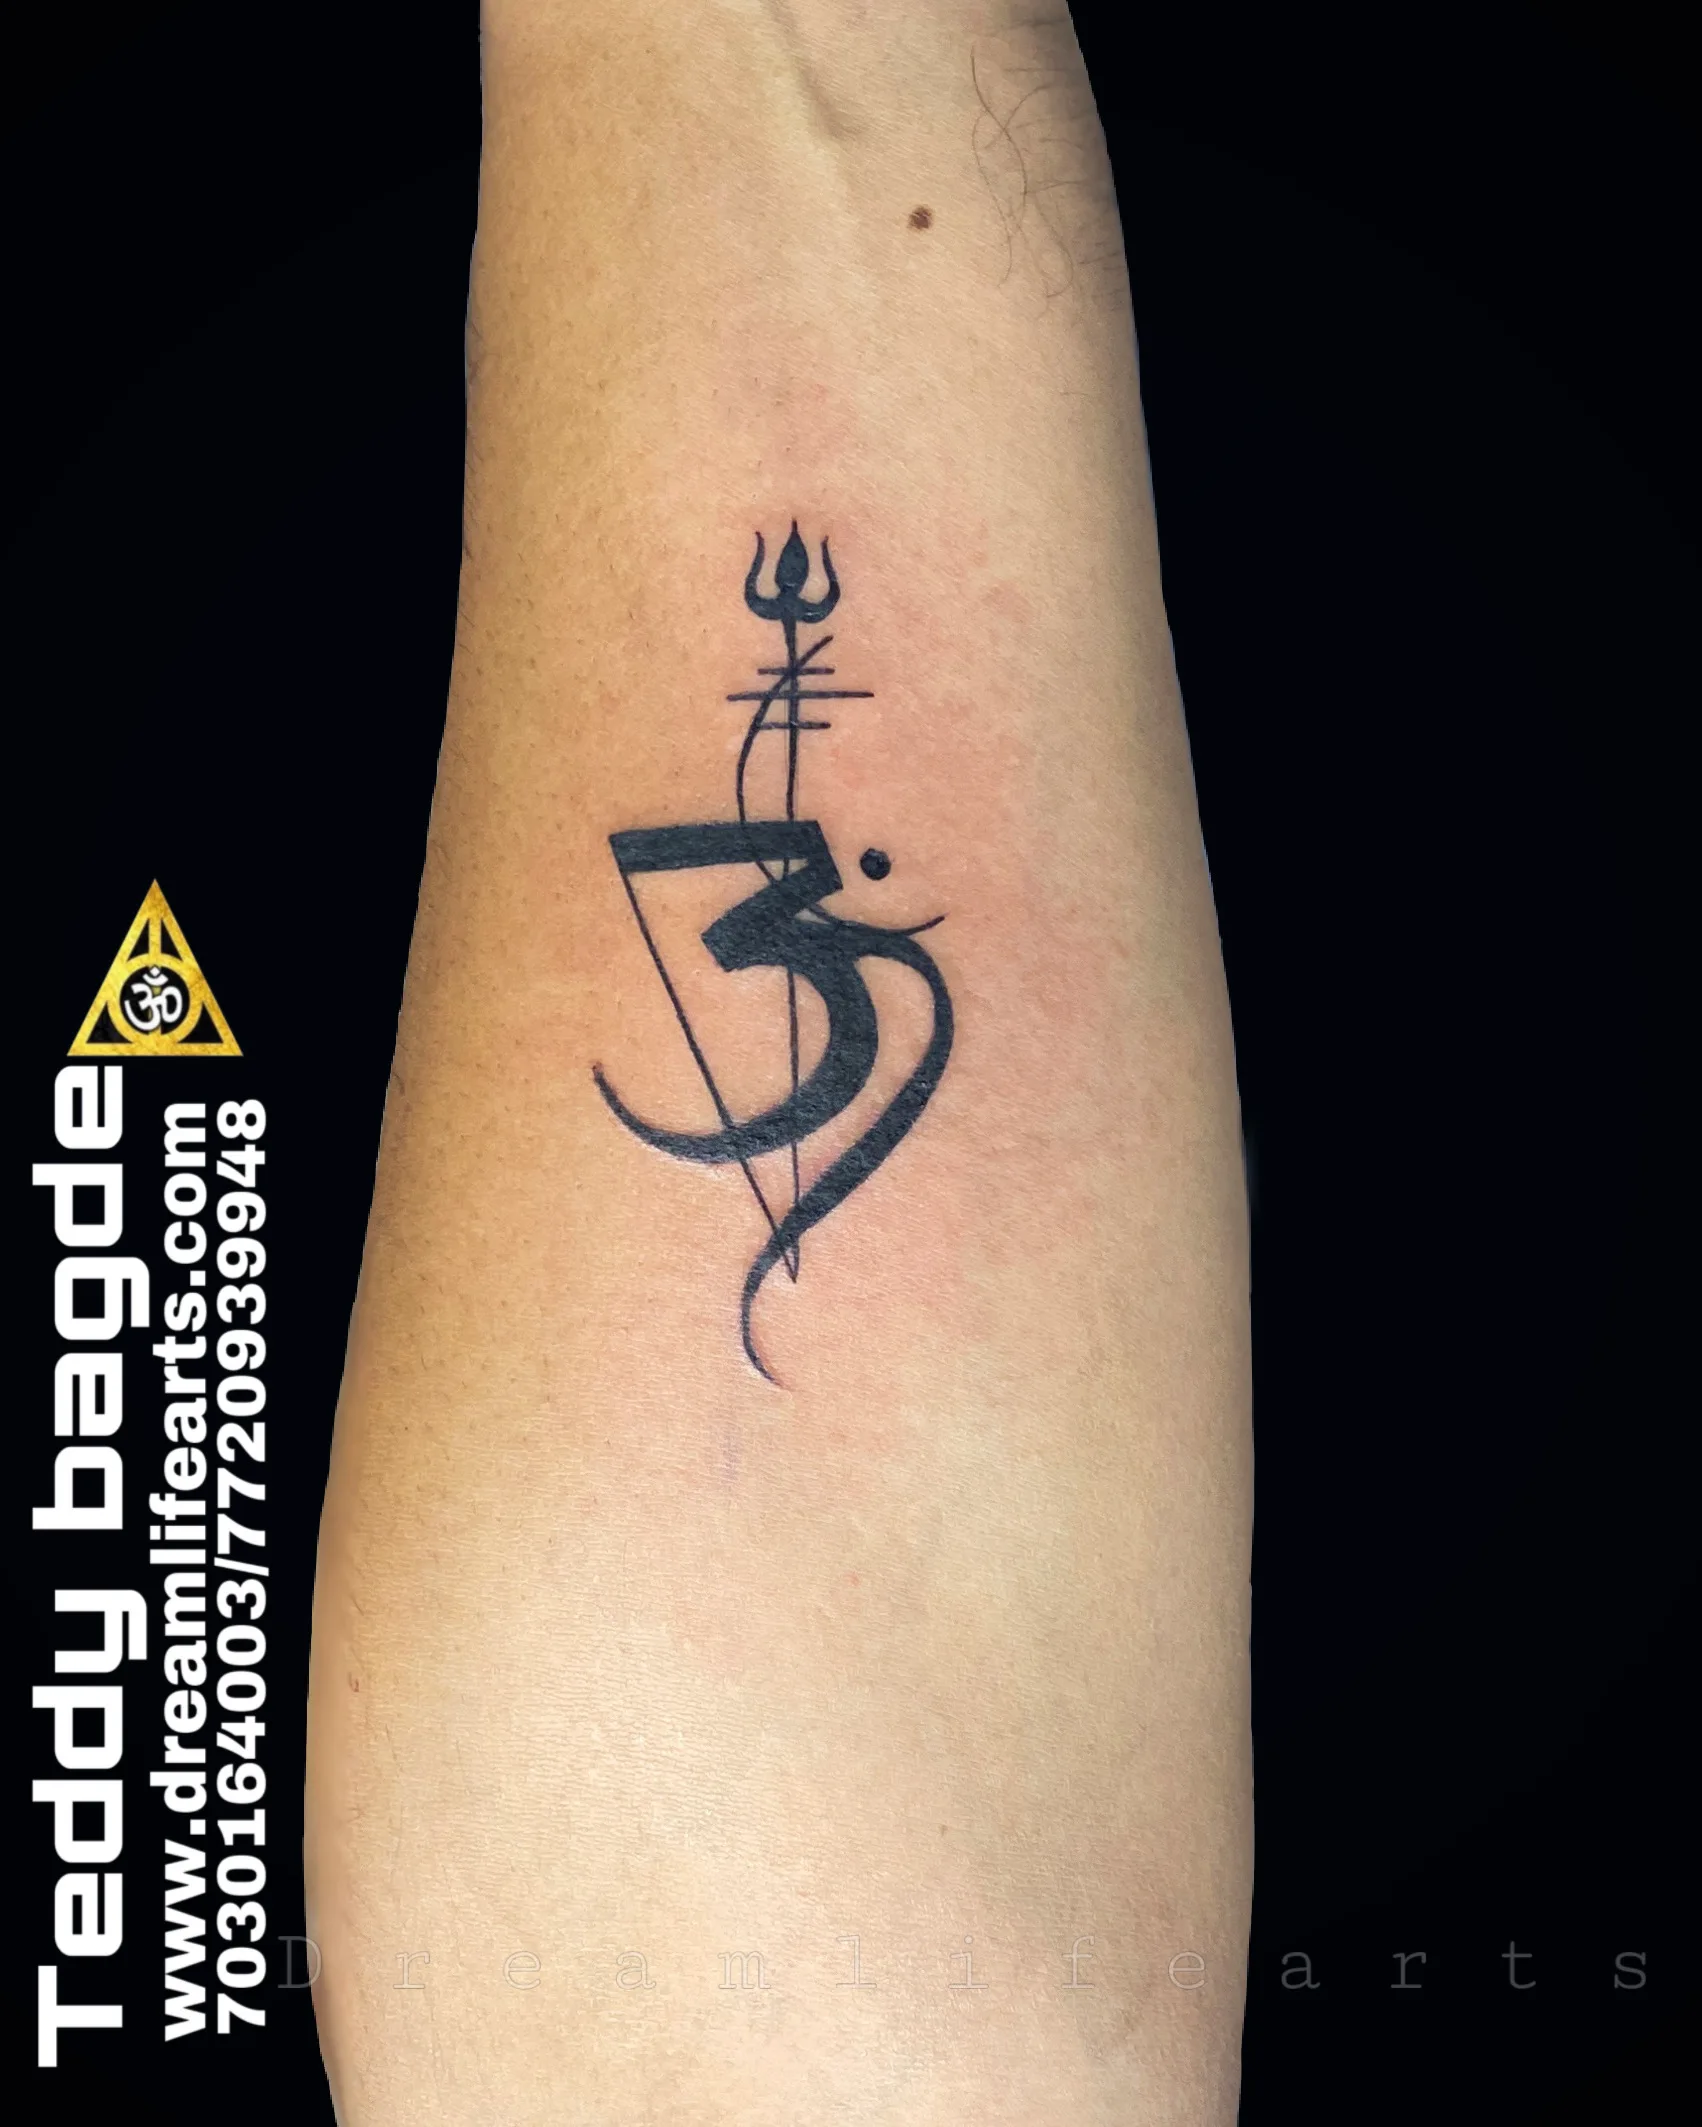 Monster BHOLE NATH Men Women Waterproof Temporary Body Tattoo - Price in  India, Buy Monster BHOLE NATH Men Women Waterproof Temporary Body Tattoo  Online In India, Reviews, Ratings & Features | Flipkart.com